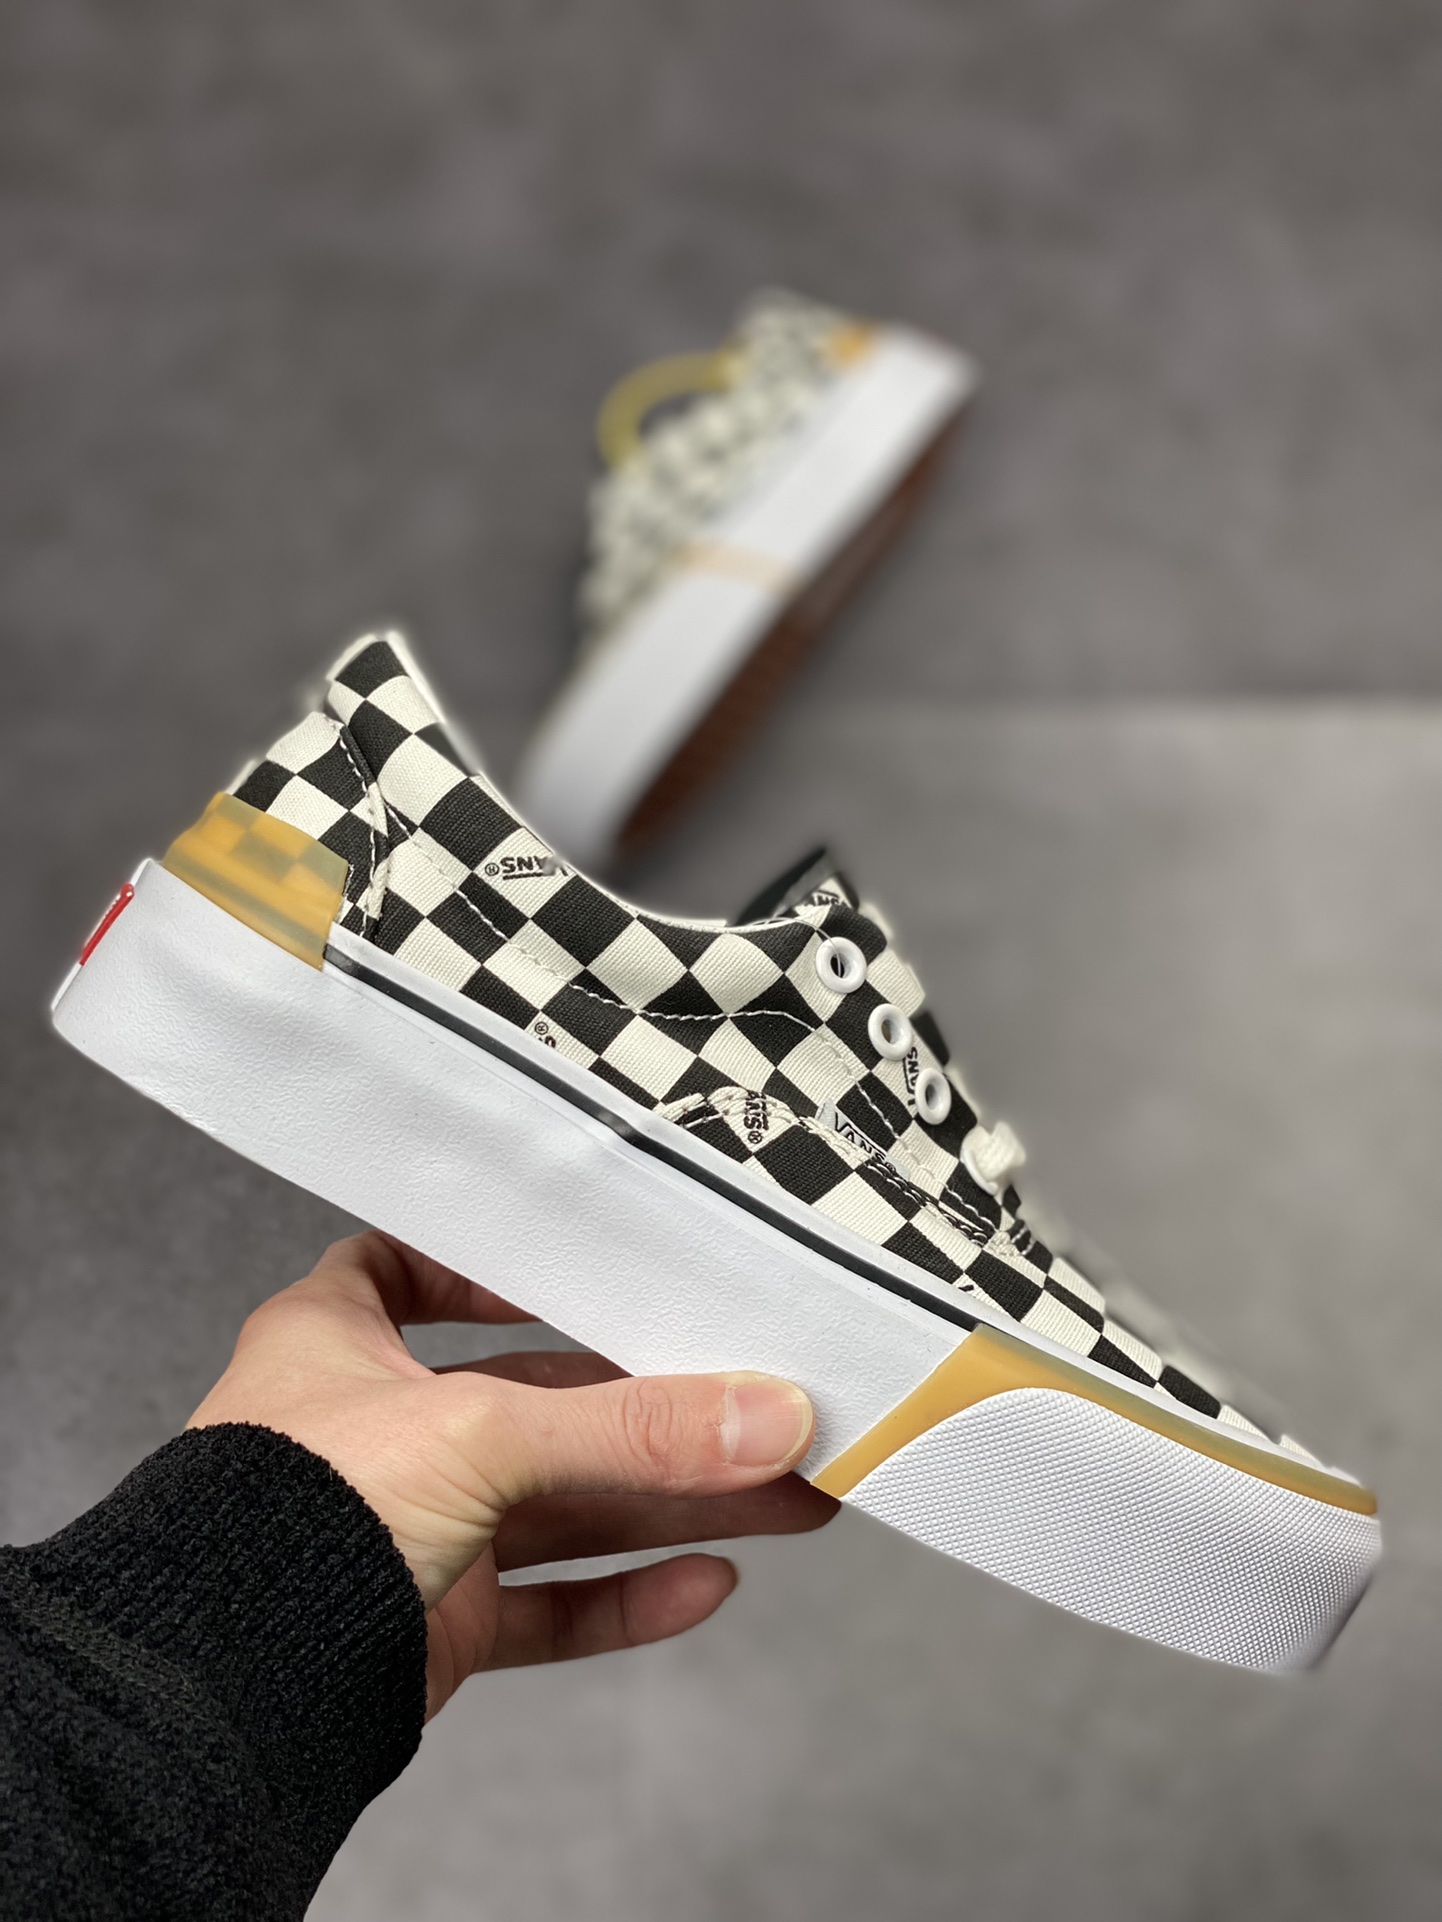 Vans Era stacked ultra-high classic checkerboard sports skateboard shoes for men and women VN0A4BTOVLV